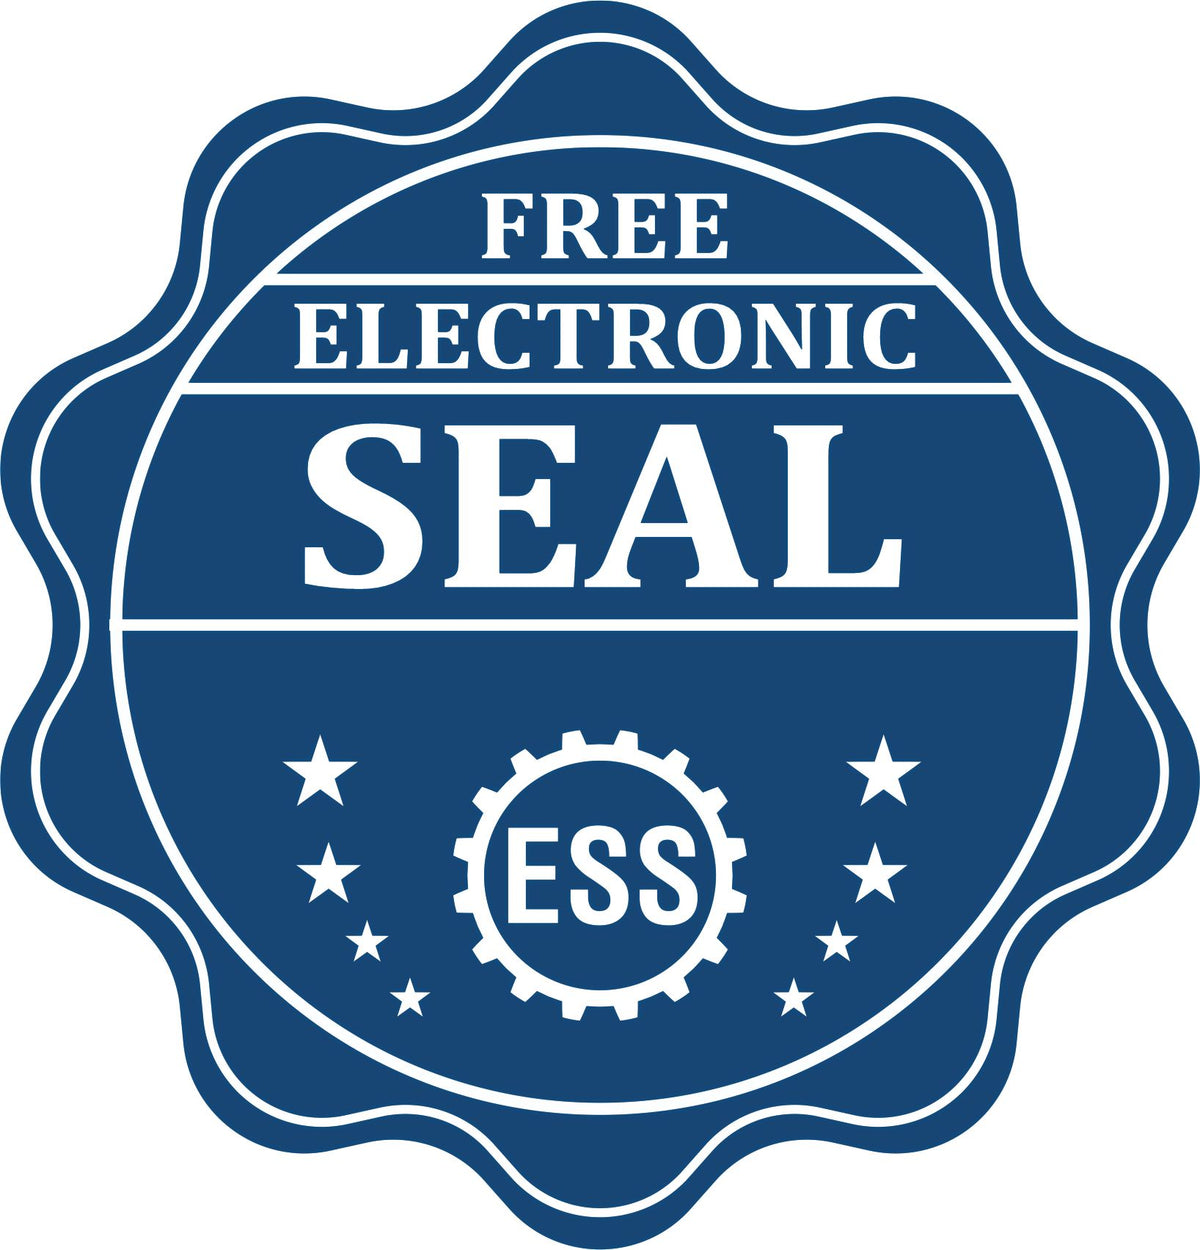 A badge showing a free electronic seal for the State of North Carolina Extended Long Reach Engineer Seal with stars and the ESS gear on the emblem.